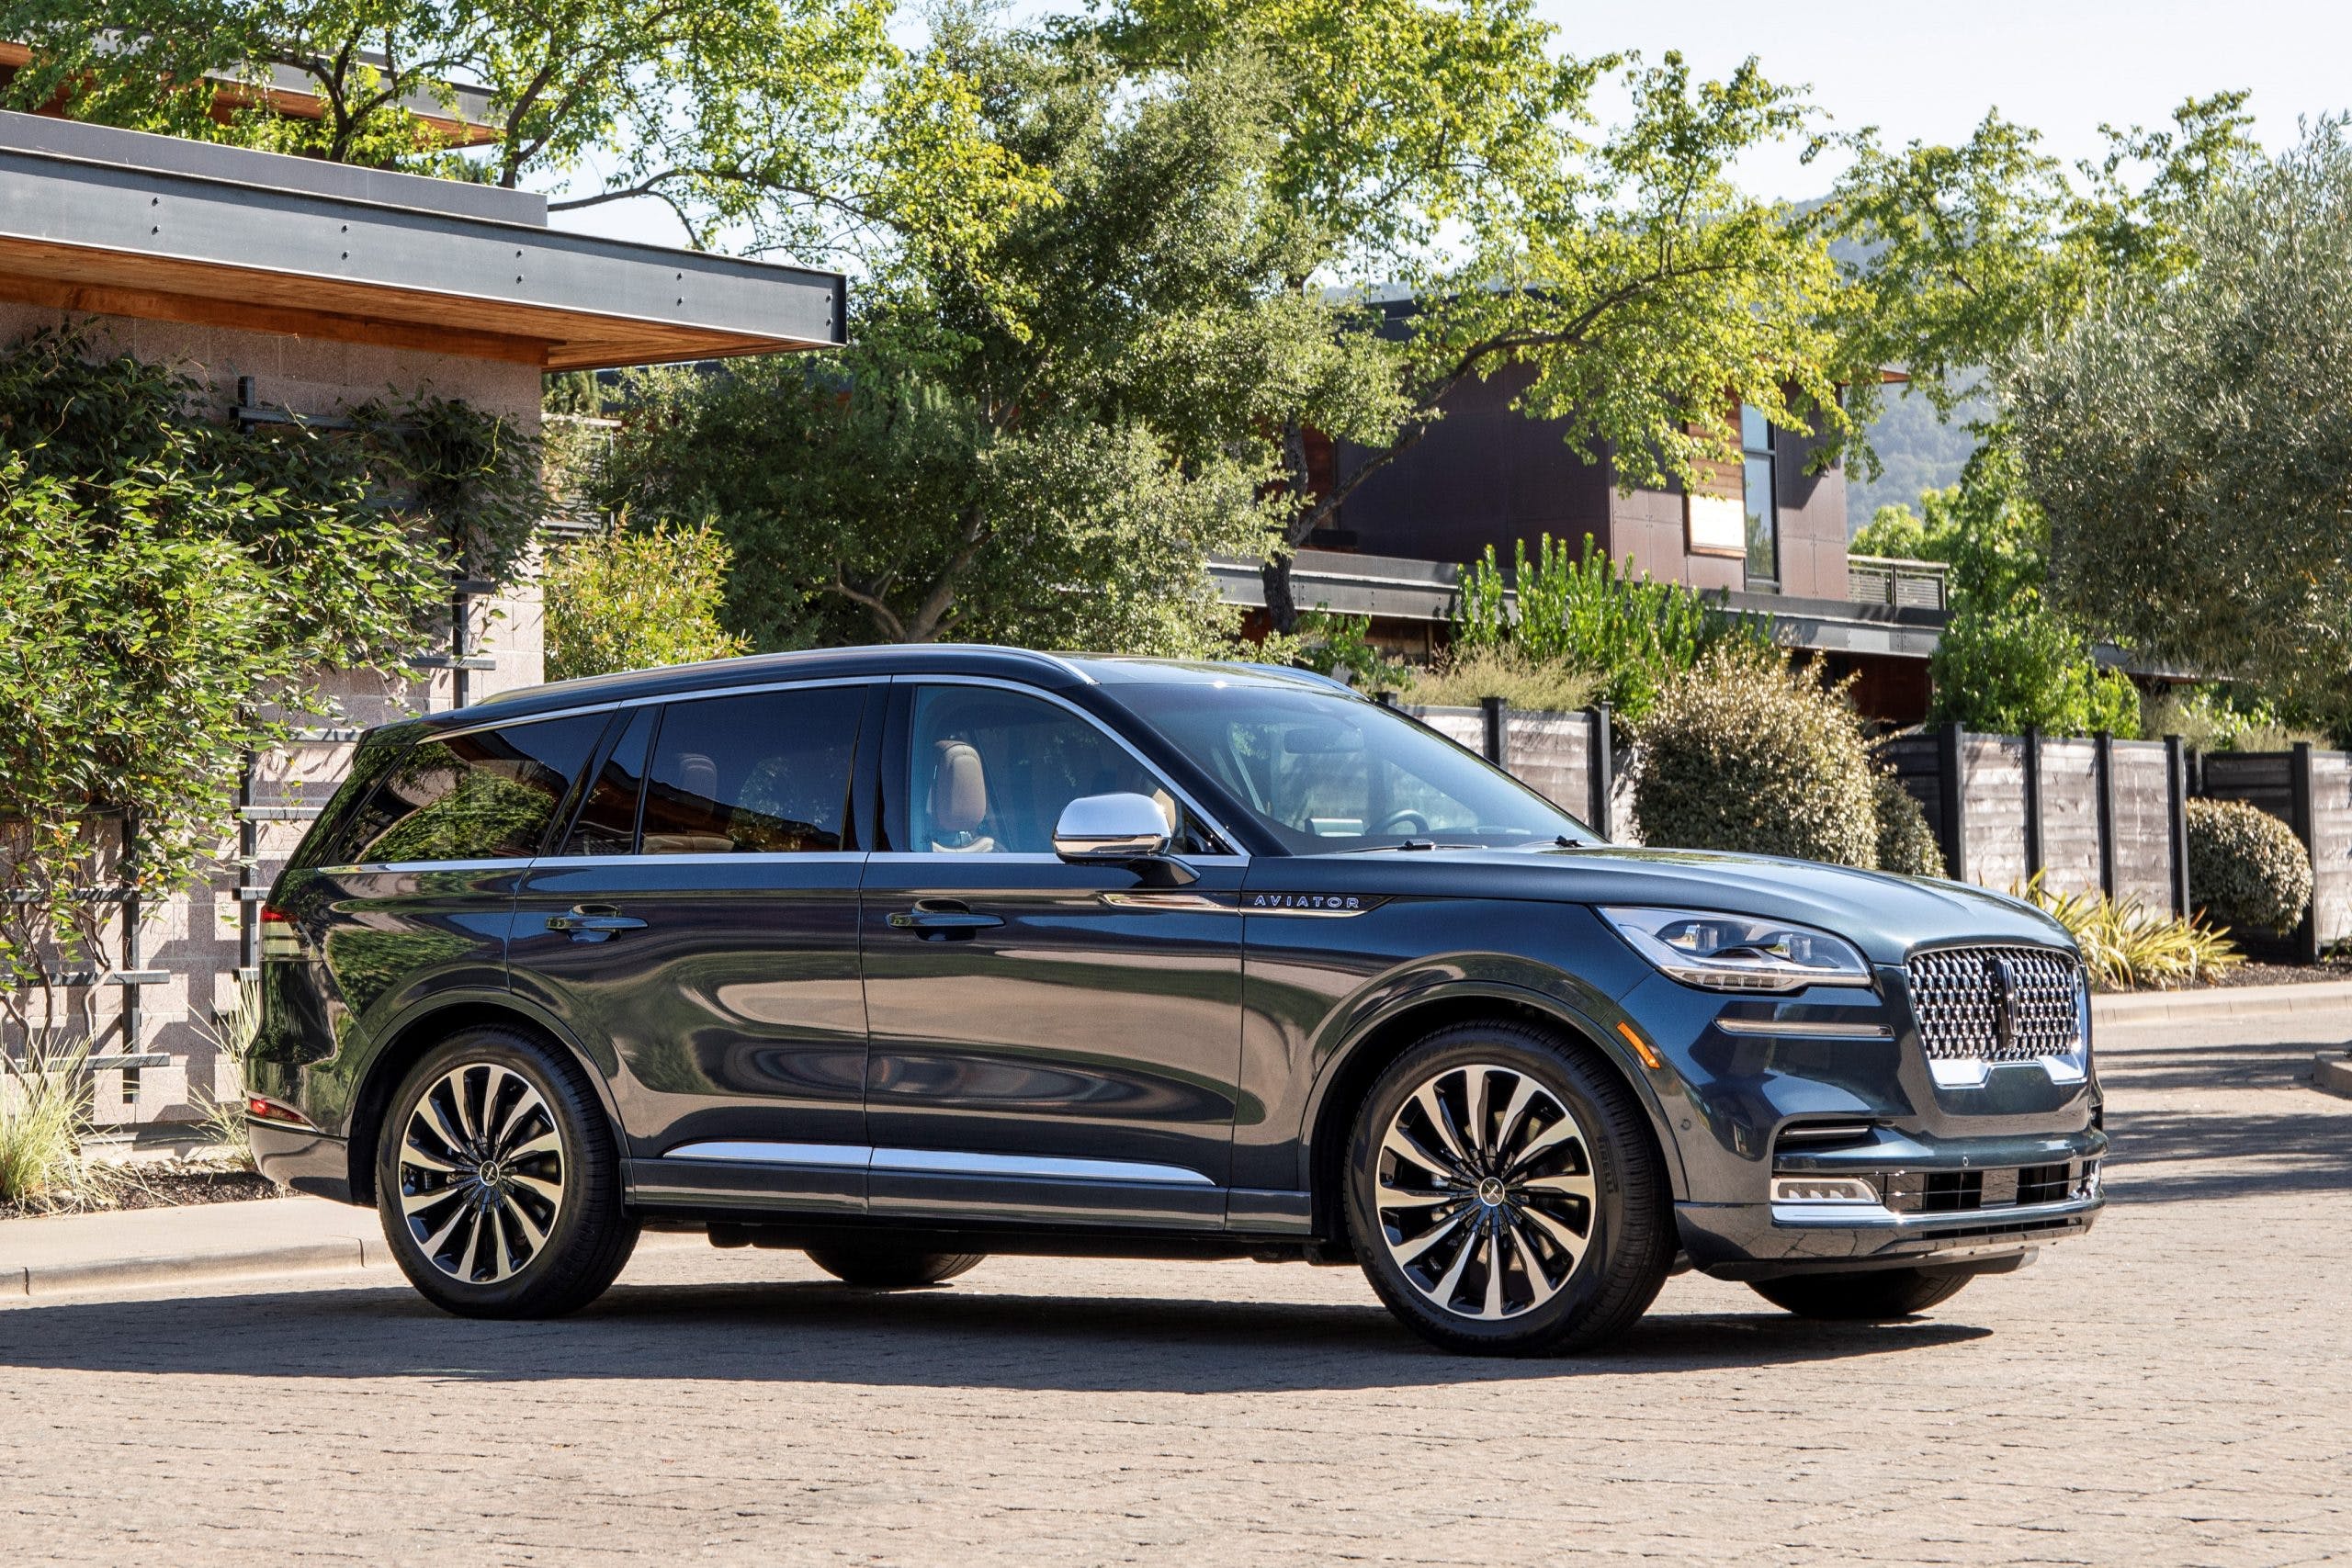 Test Drive: 2021 Lincoln Aviator Hybrid Review - CARFAX